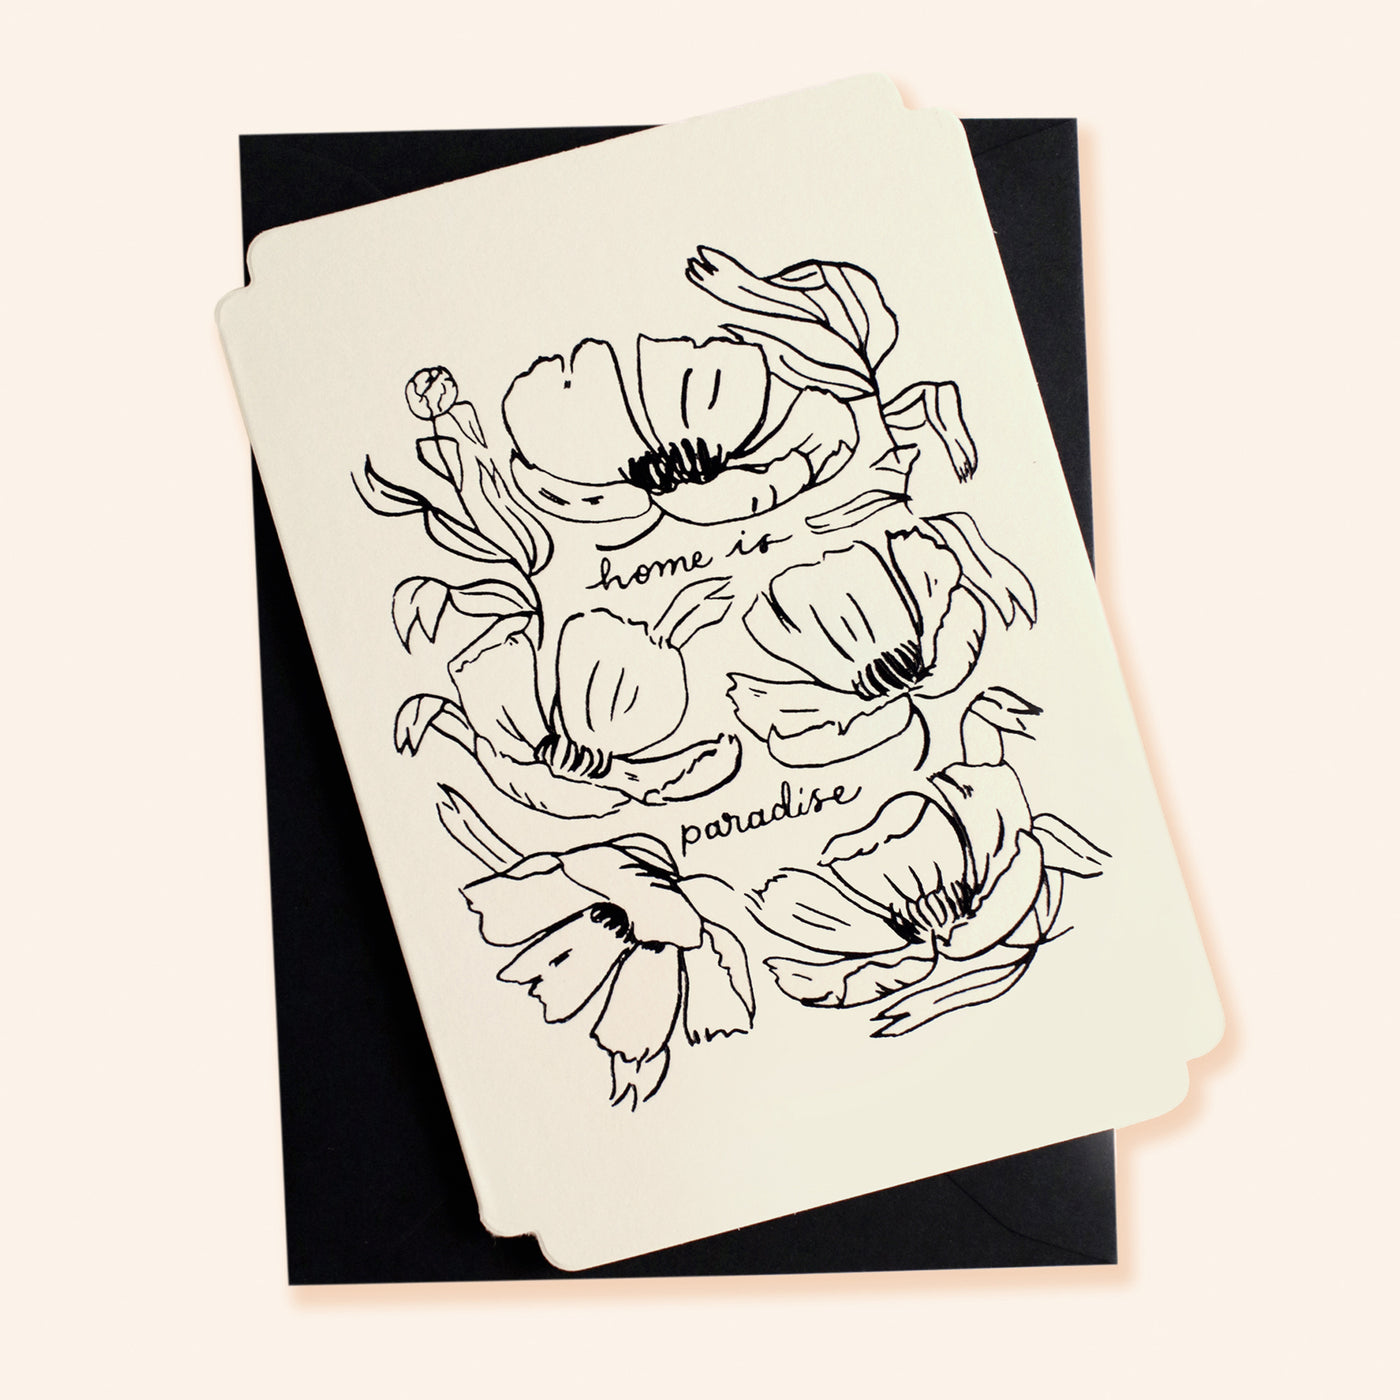 Black Floral Line Art Work A6 White Card  With The Words Home Is Paradise Coupled With A Black Envelope - Annie Dornan Smith